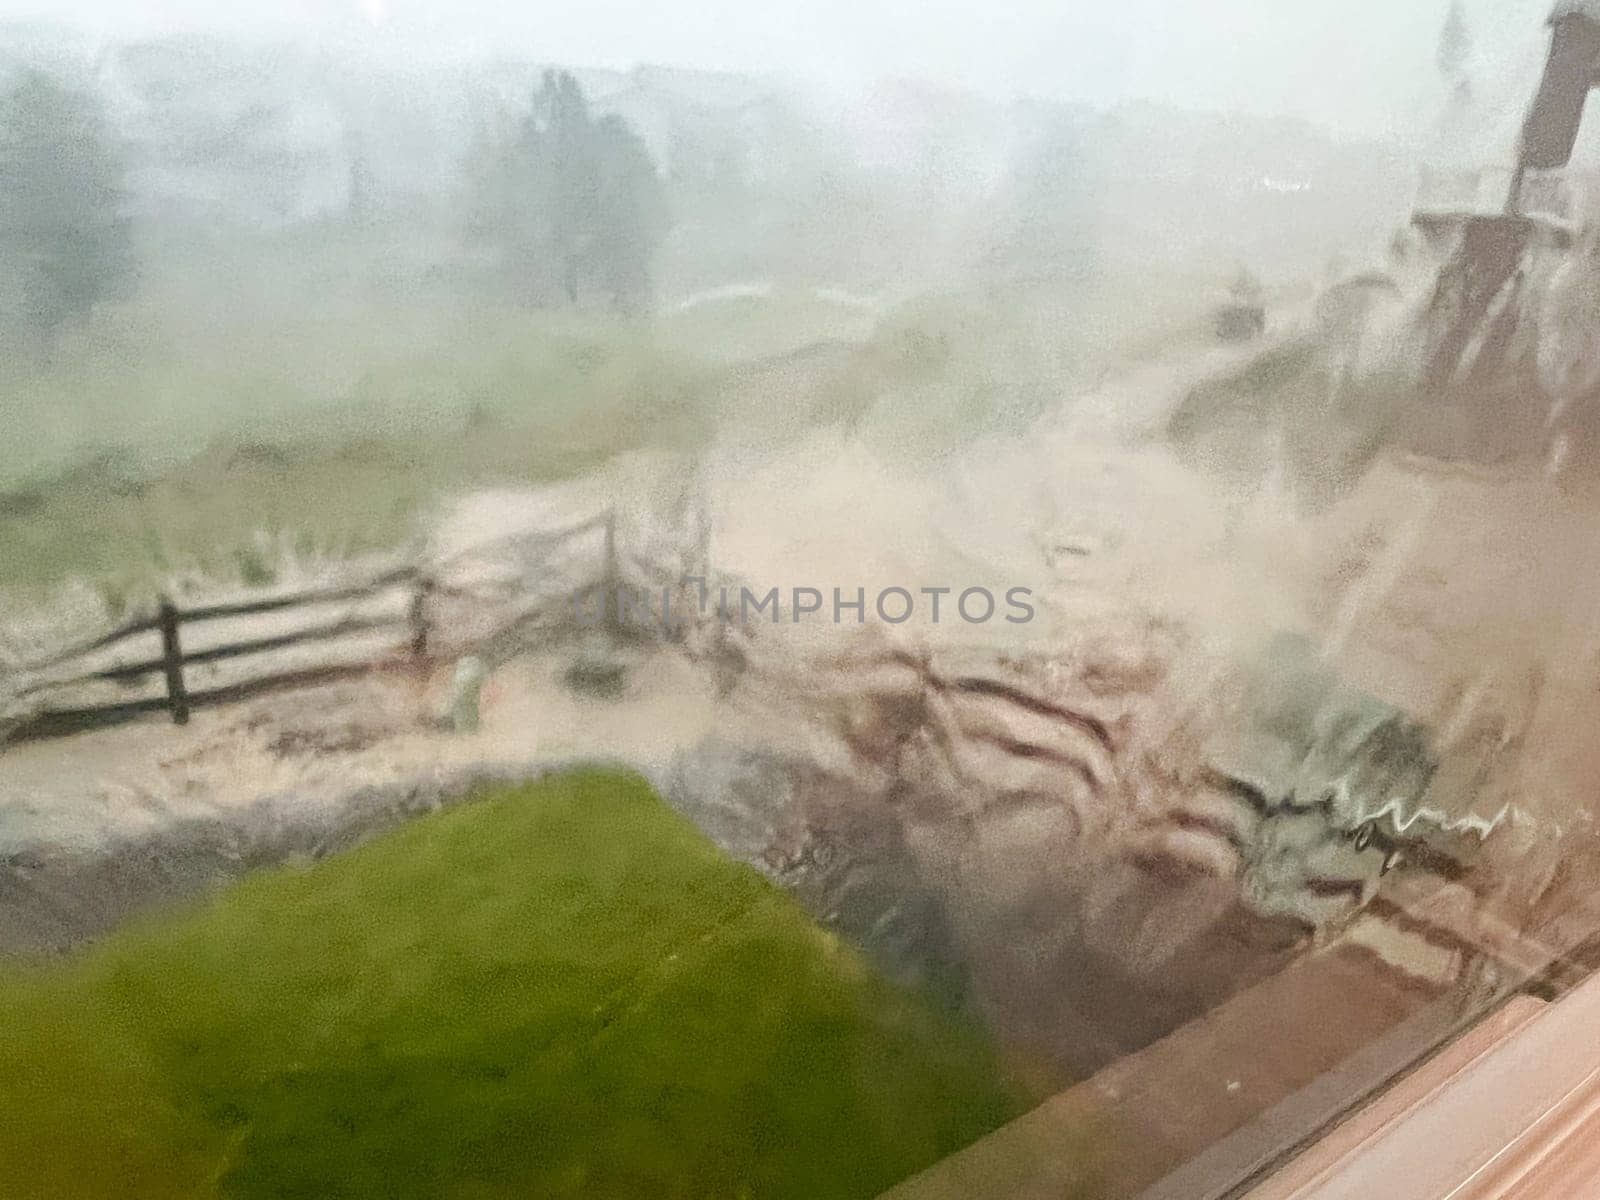 A view through a rain-streaked window capturing a heavy downpour with hail and flash flooding in a suburban backyard. The scene shows blurred fences, trees, and lawn due to the intense rain and hail.